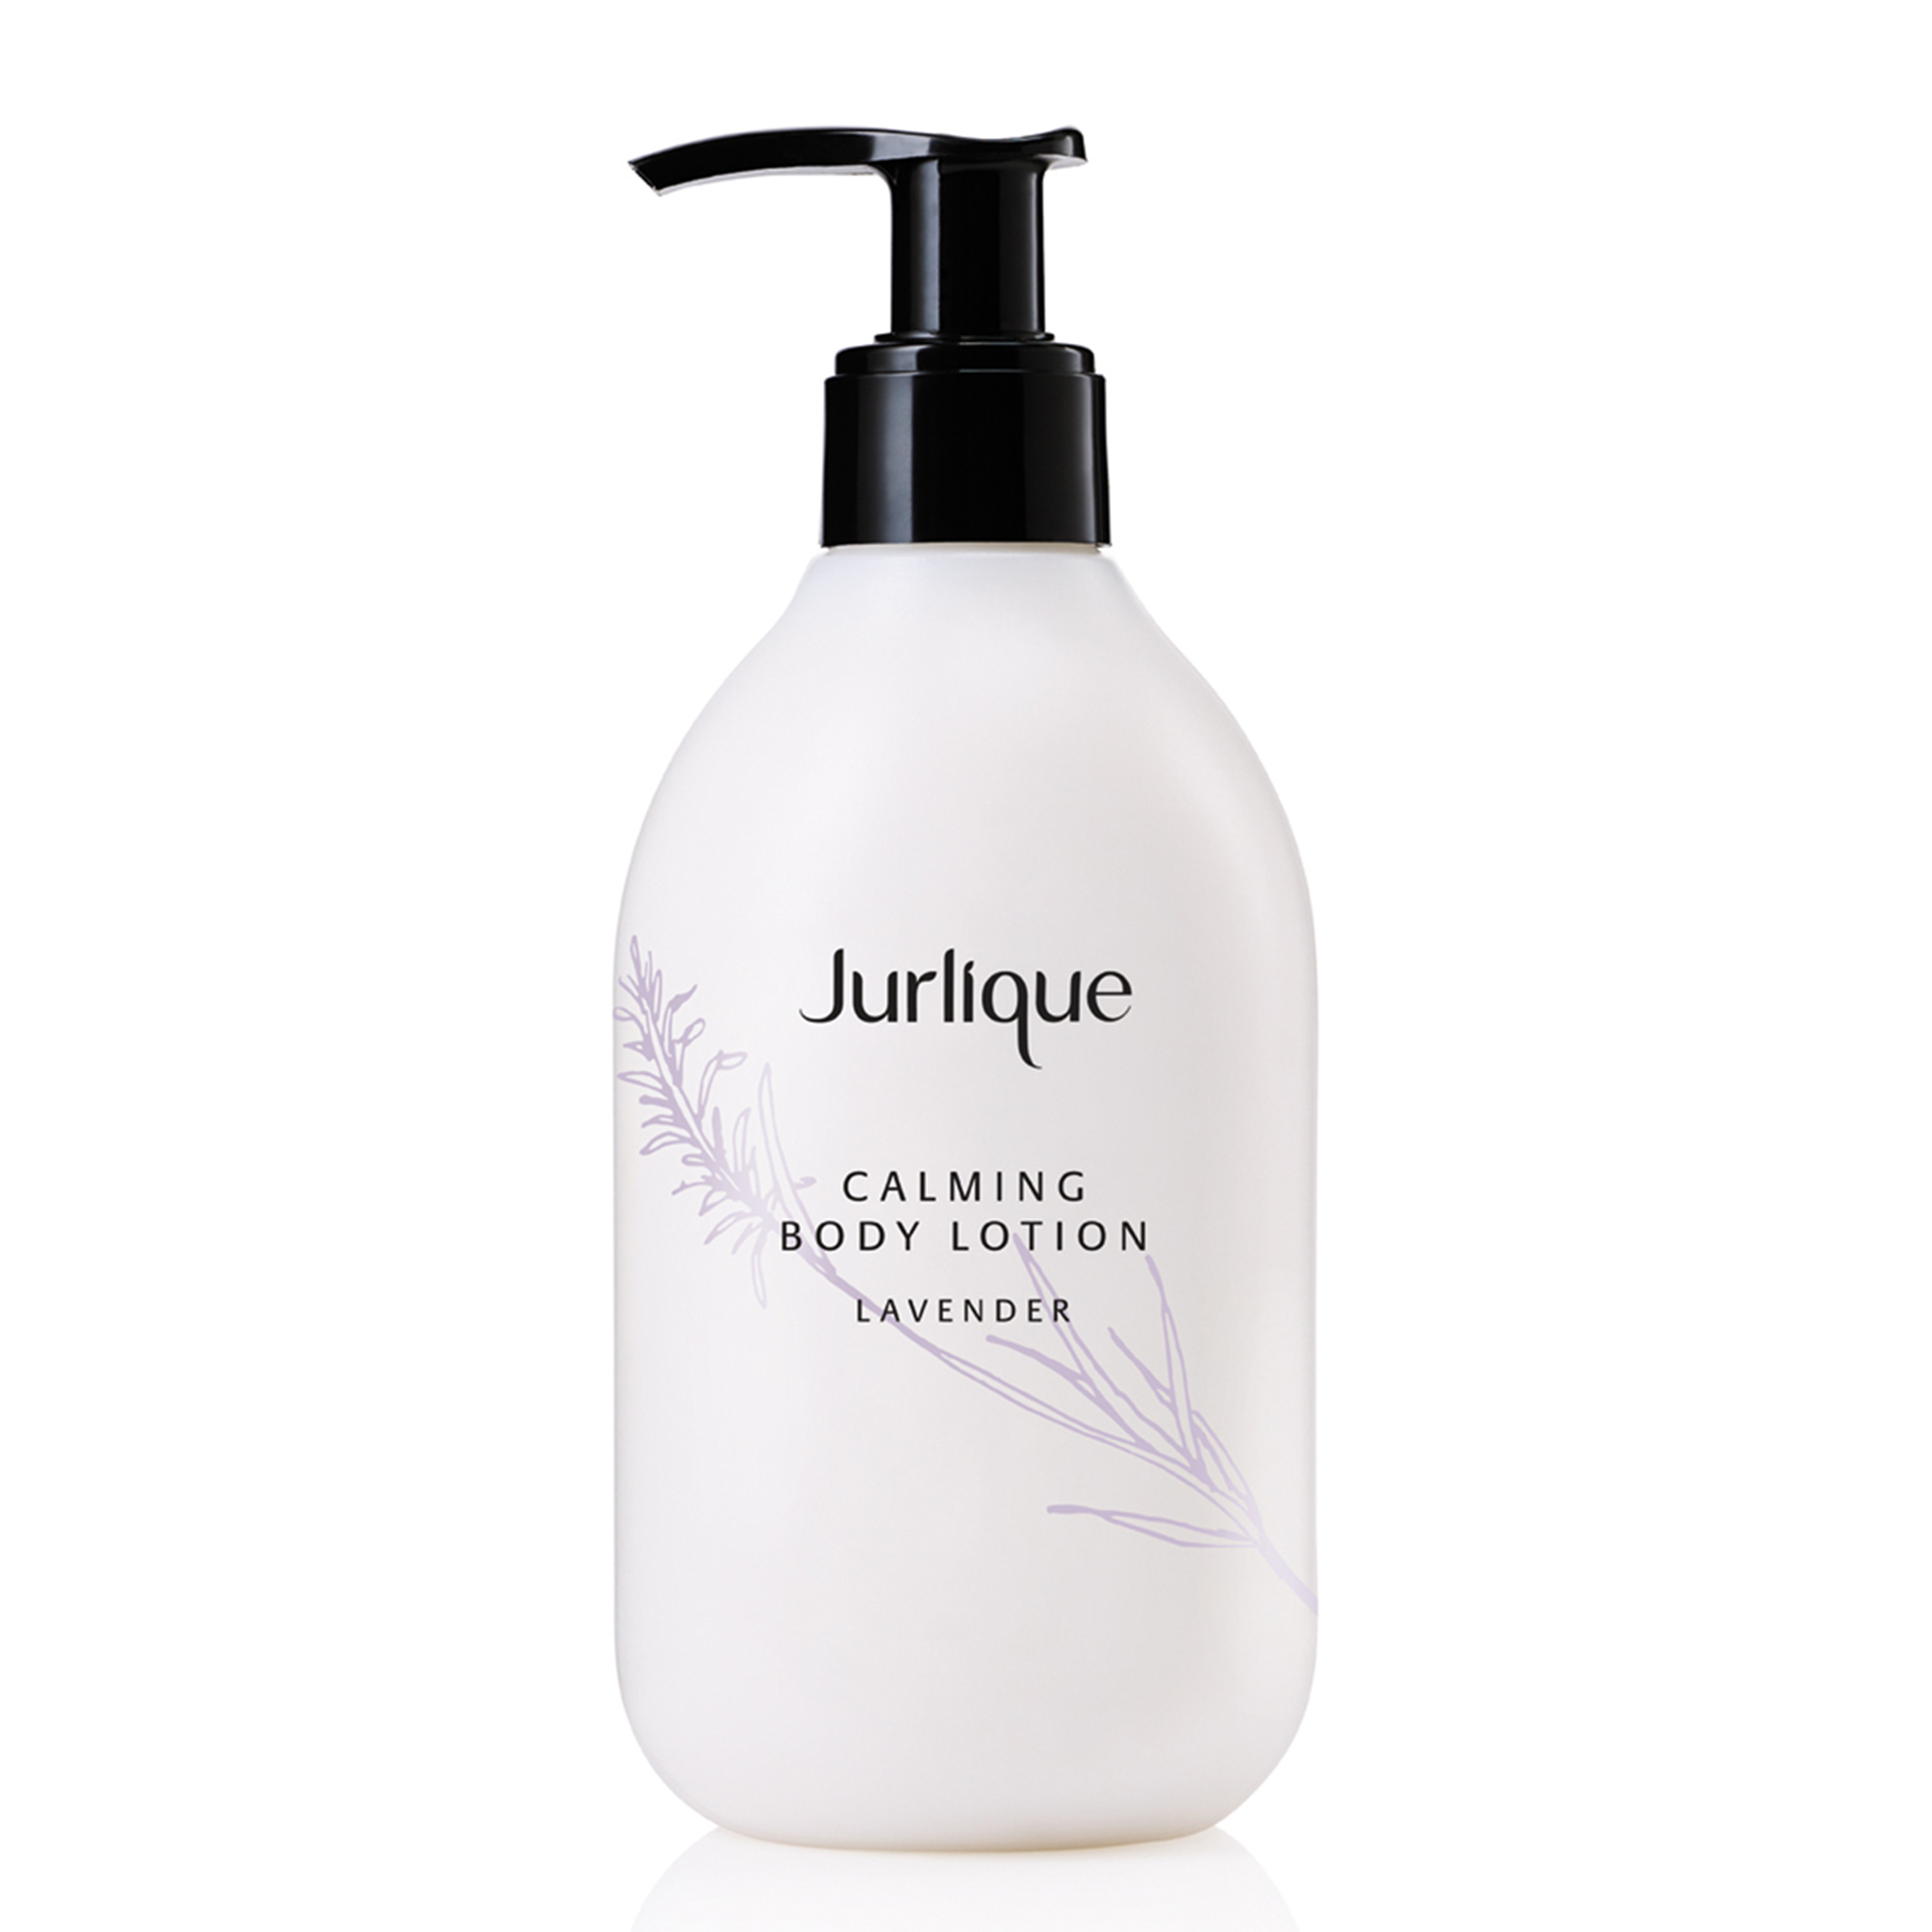  Calming Lavender Body Lotion